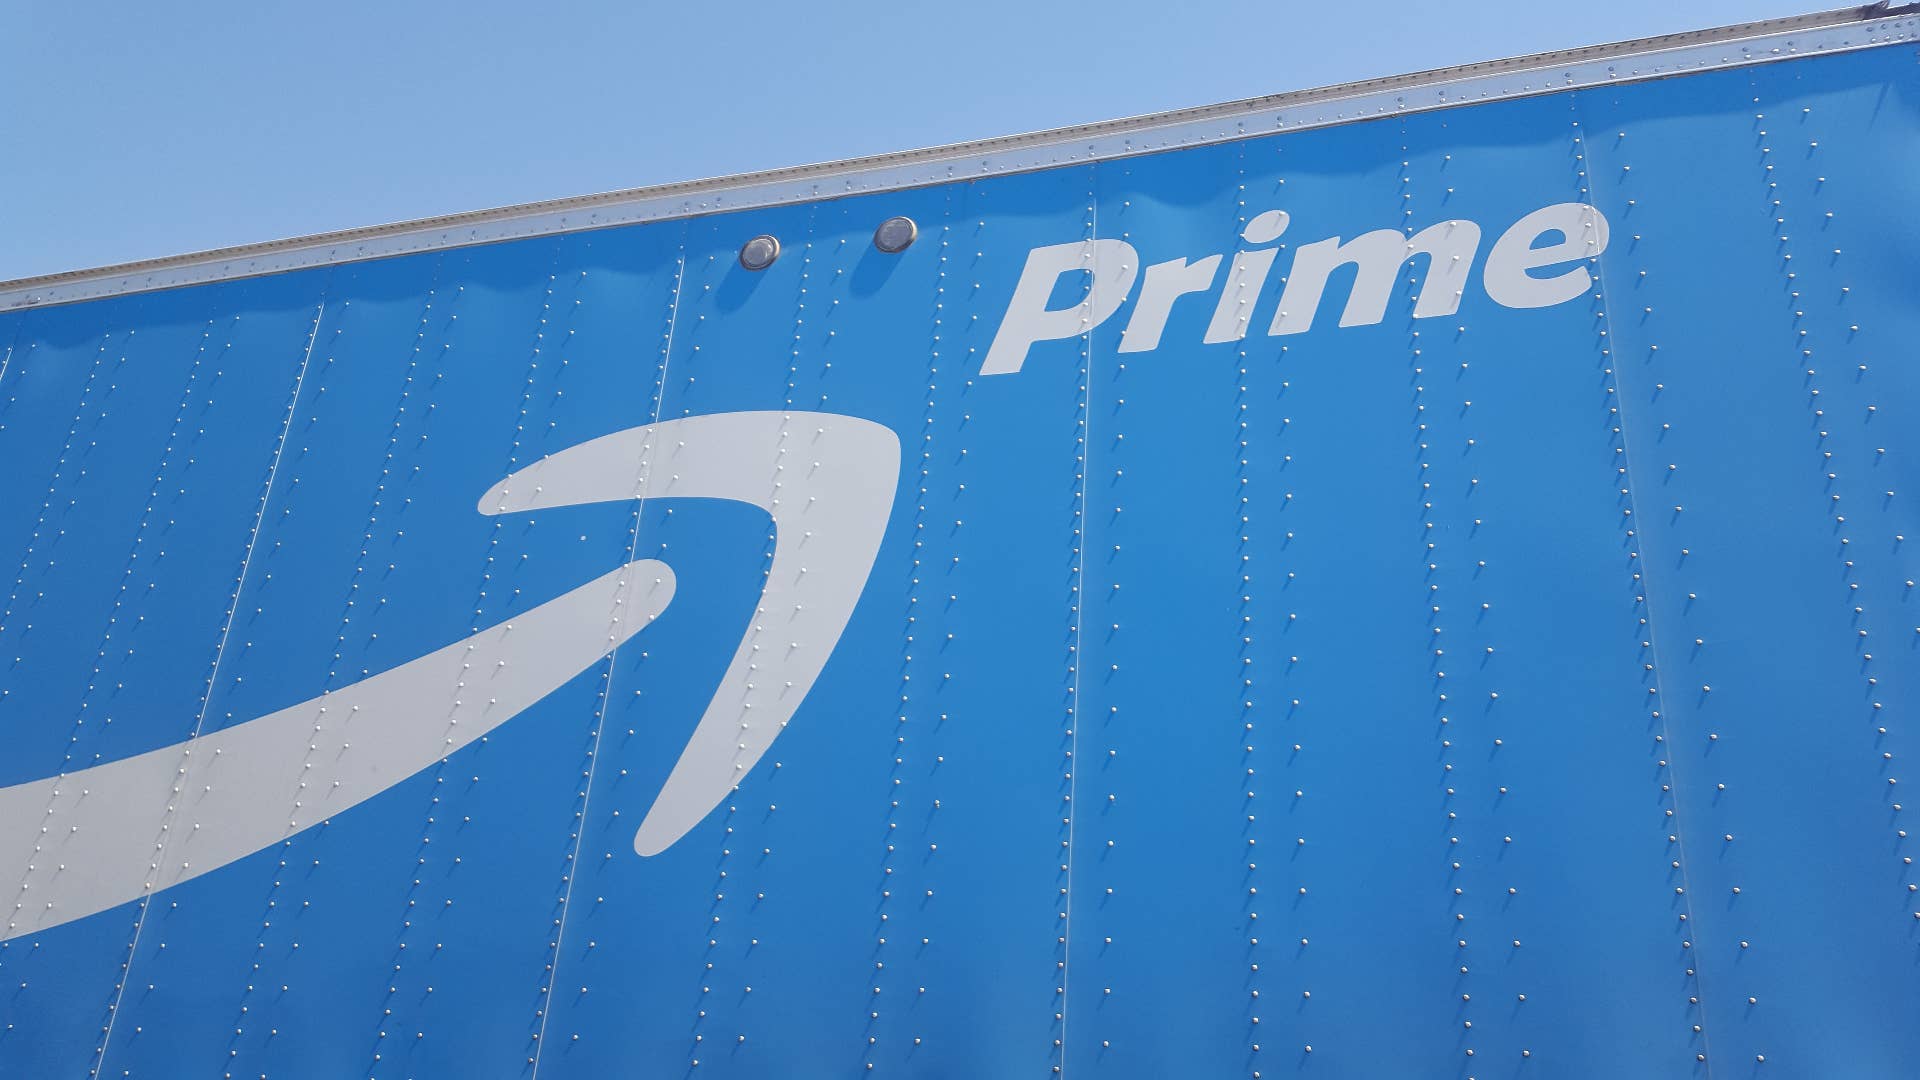 The Amazon Prime logo on the side of a tractor trailer semi truck.